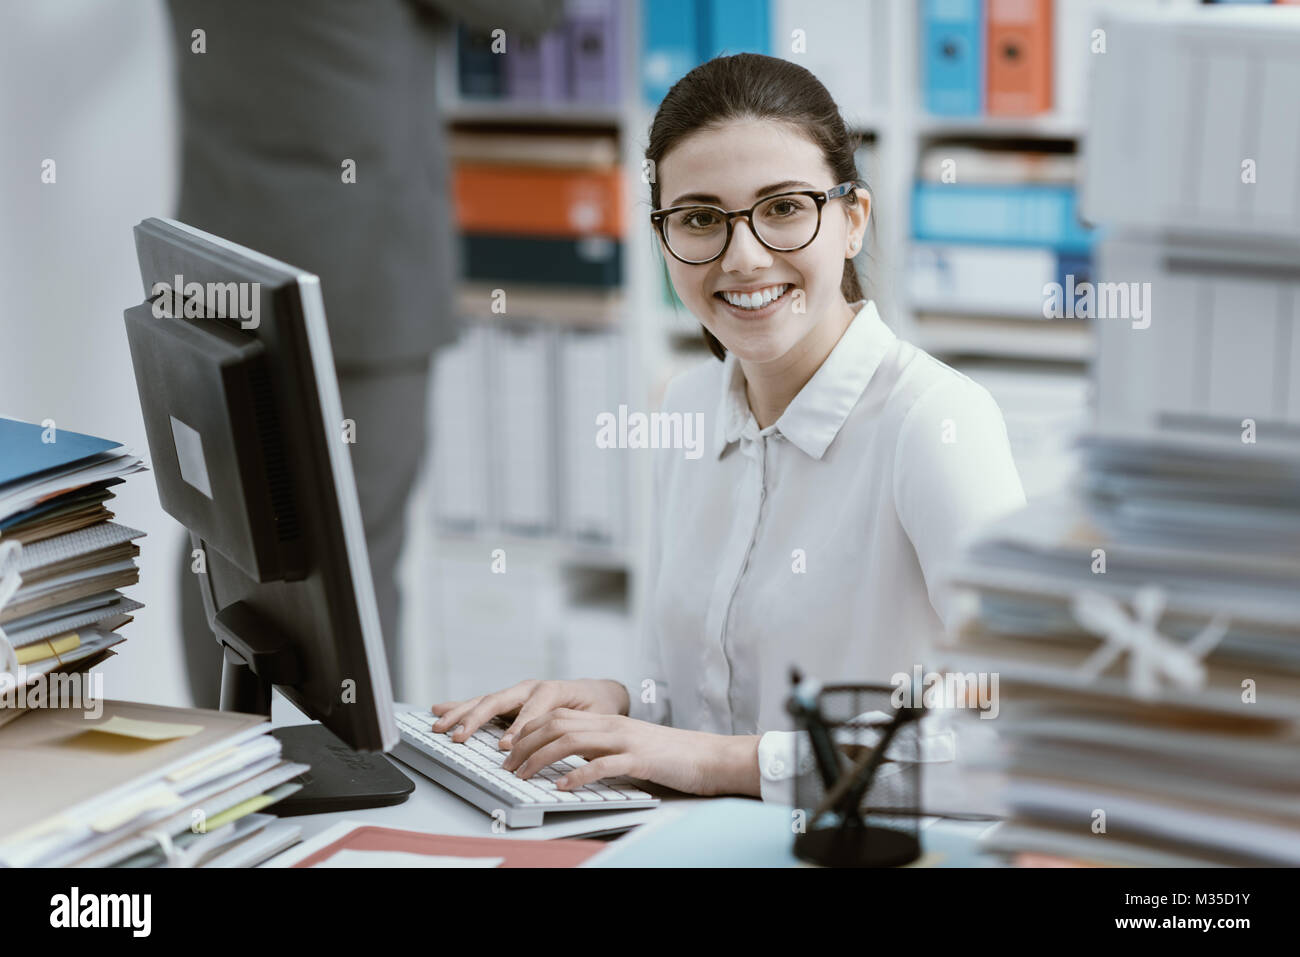 Young smiling secretary working at office desk and stacks of paperwork Stock Photo